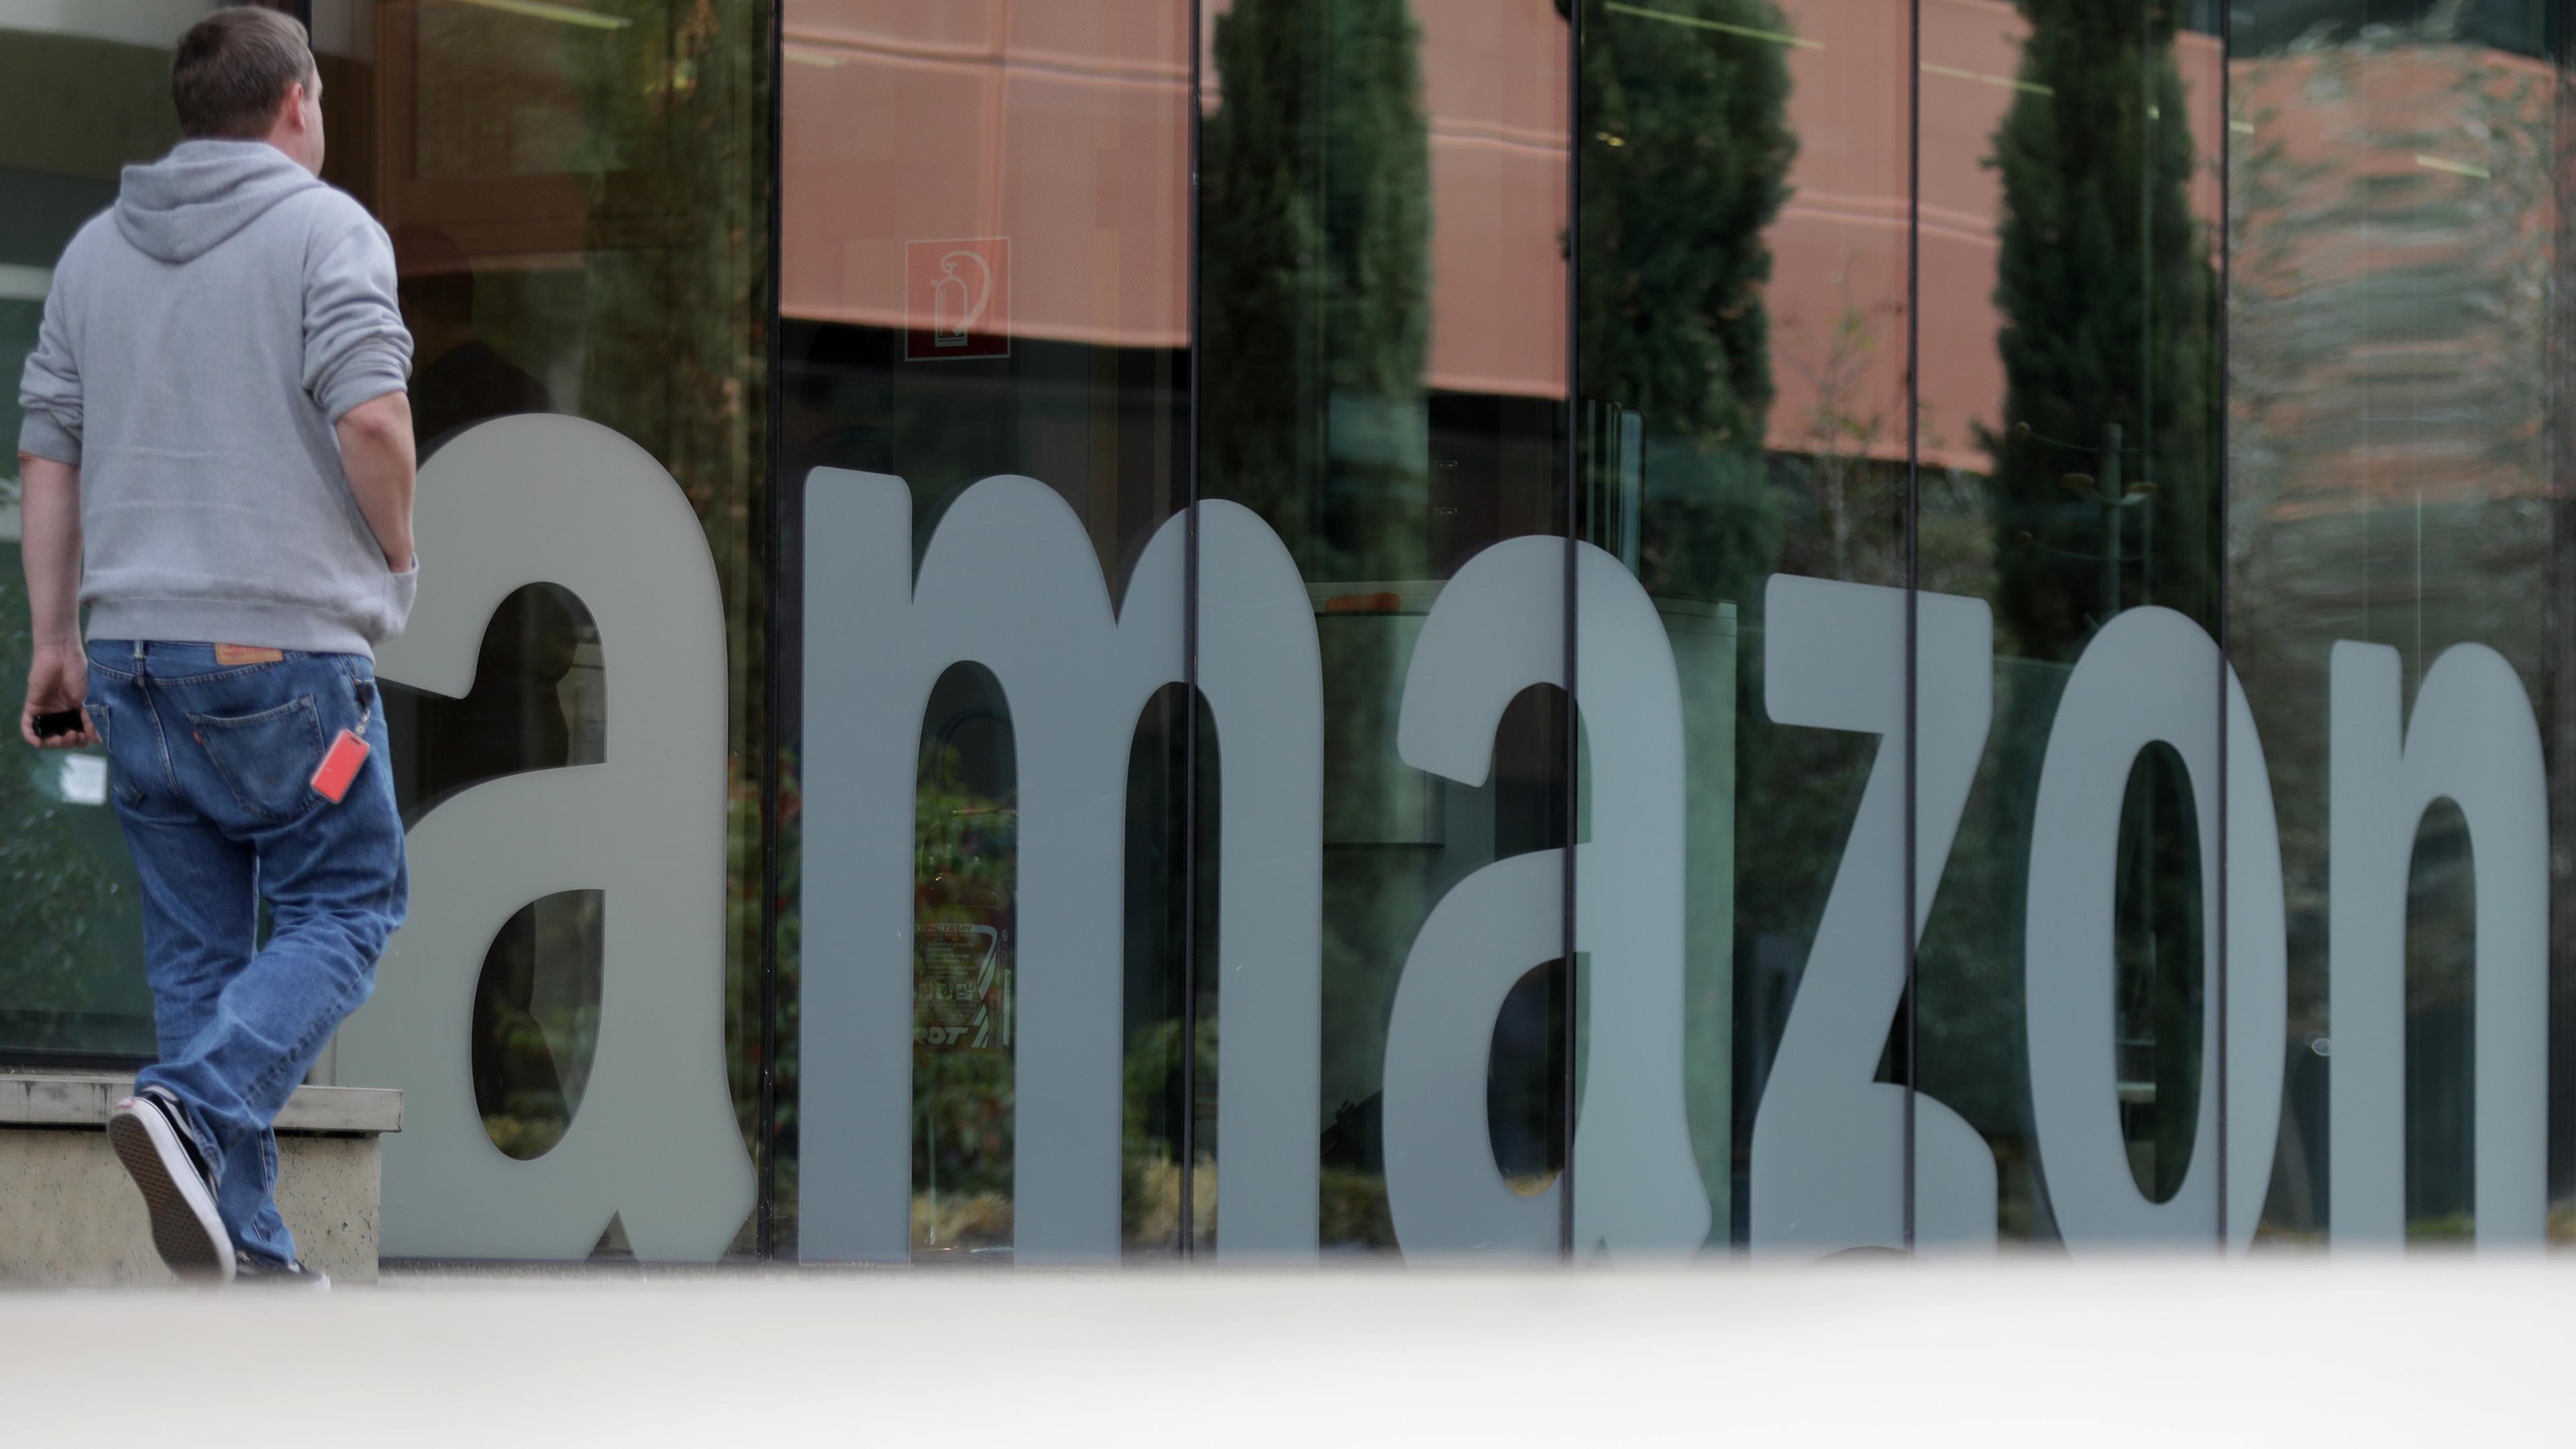 Online retail giant Amazon, which has its EU headquarters in Luxembourg, received a €746 million from the country’s data protection regulator in 2021